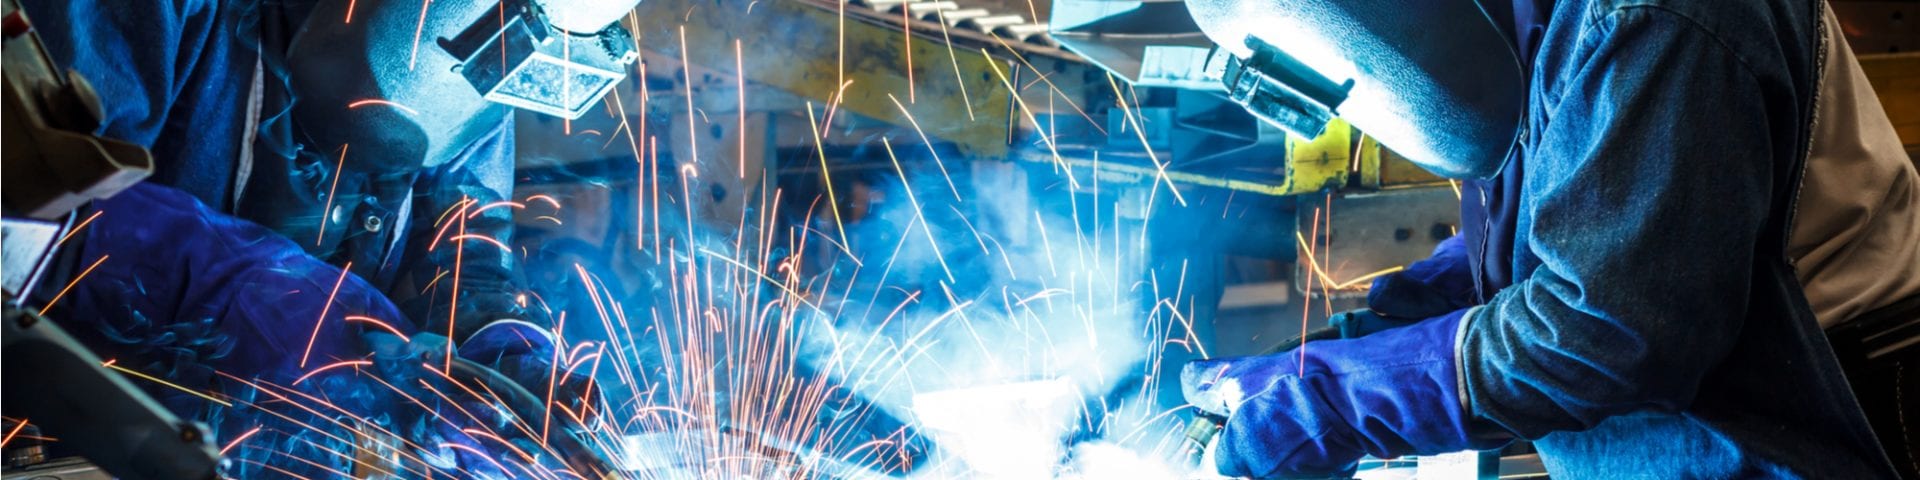 Welding Fume Health Hazards – There are Many!!!